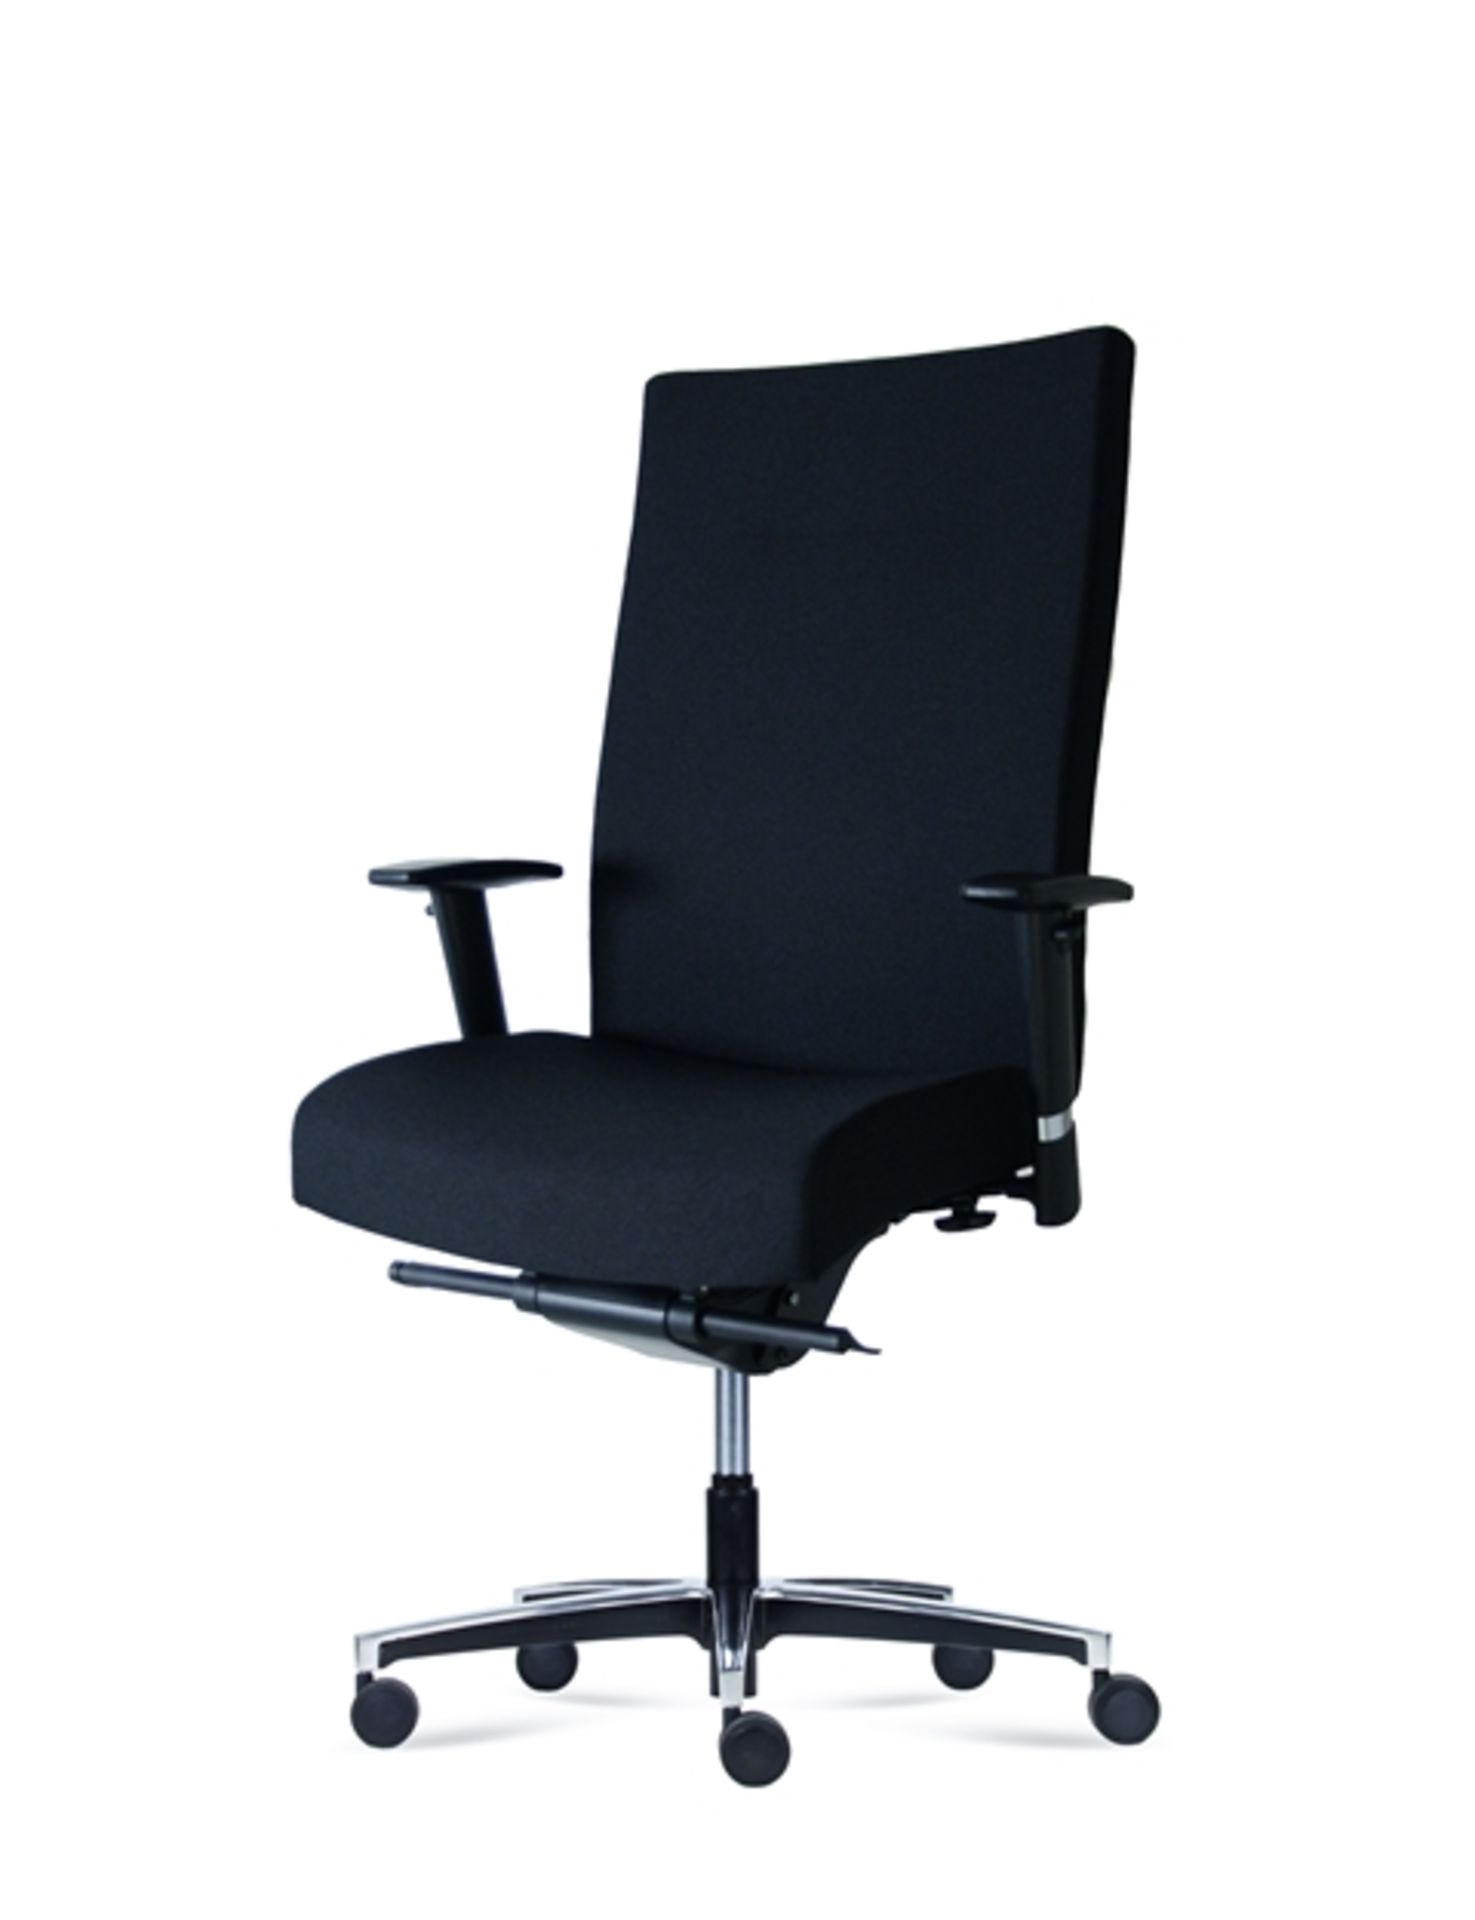 Unused ergonomic office chair in black (RRP £299) located in Stafford, viewing by appointment only - Image 2 of 6